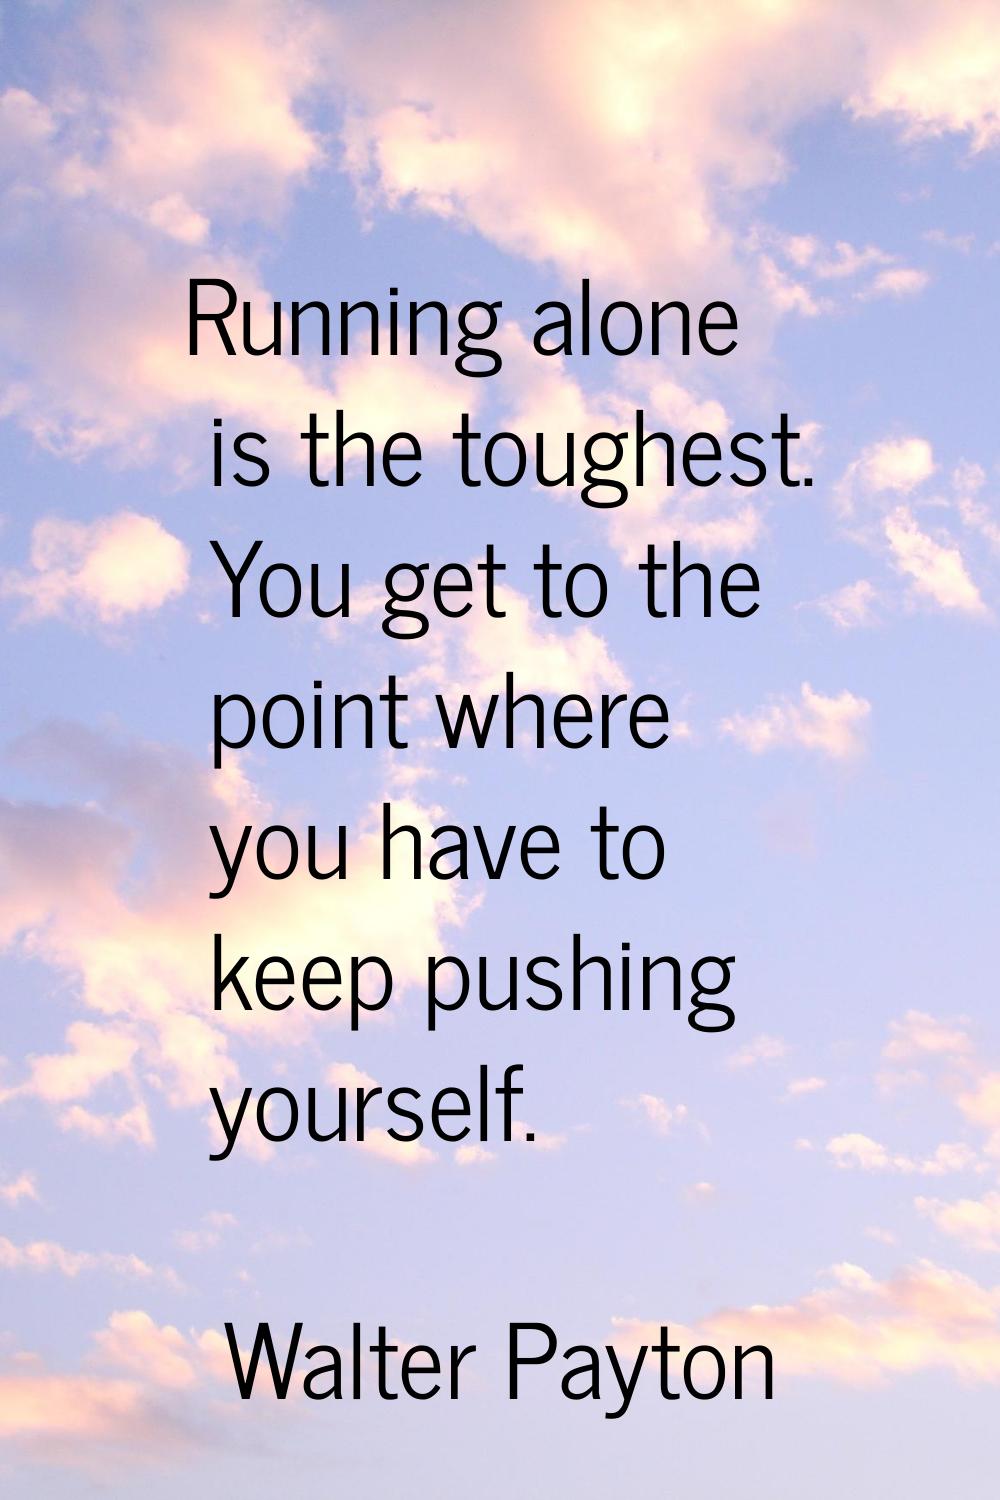 Running alone is the toughest. You get to the point where you have to keep pushing yourself.